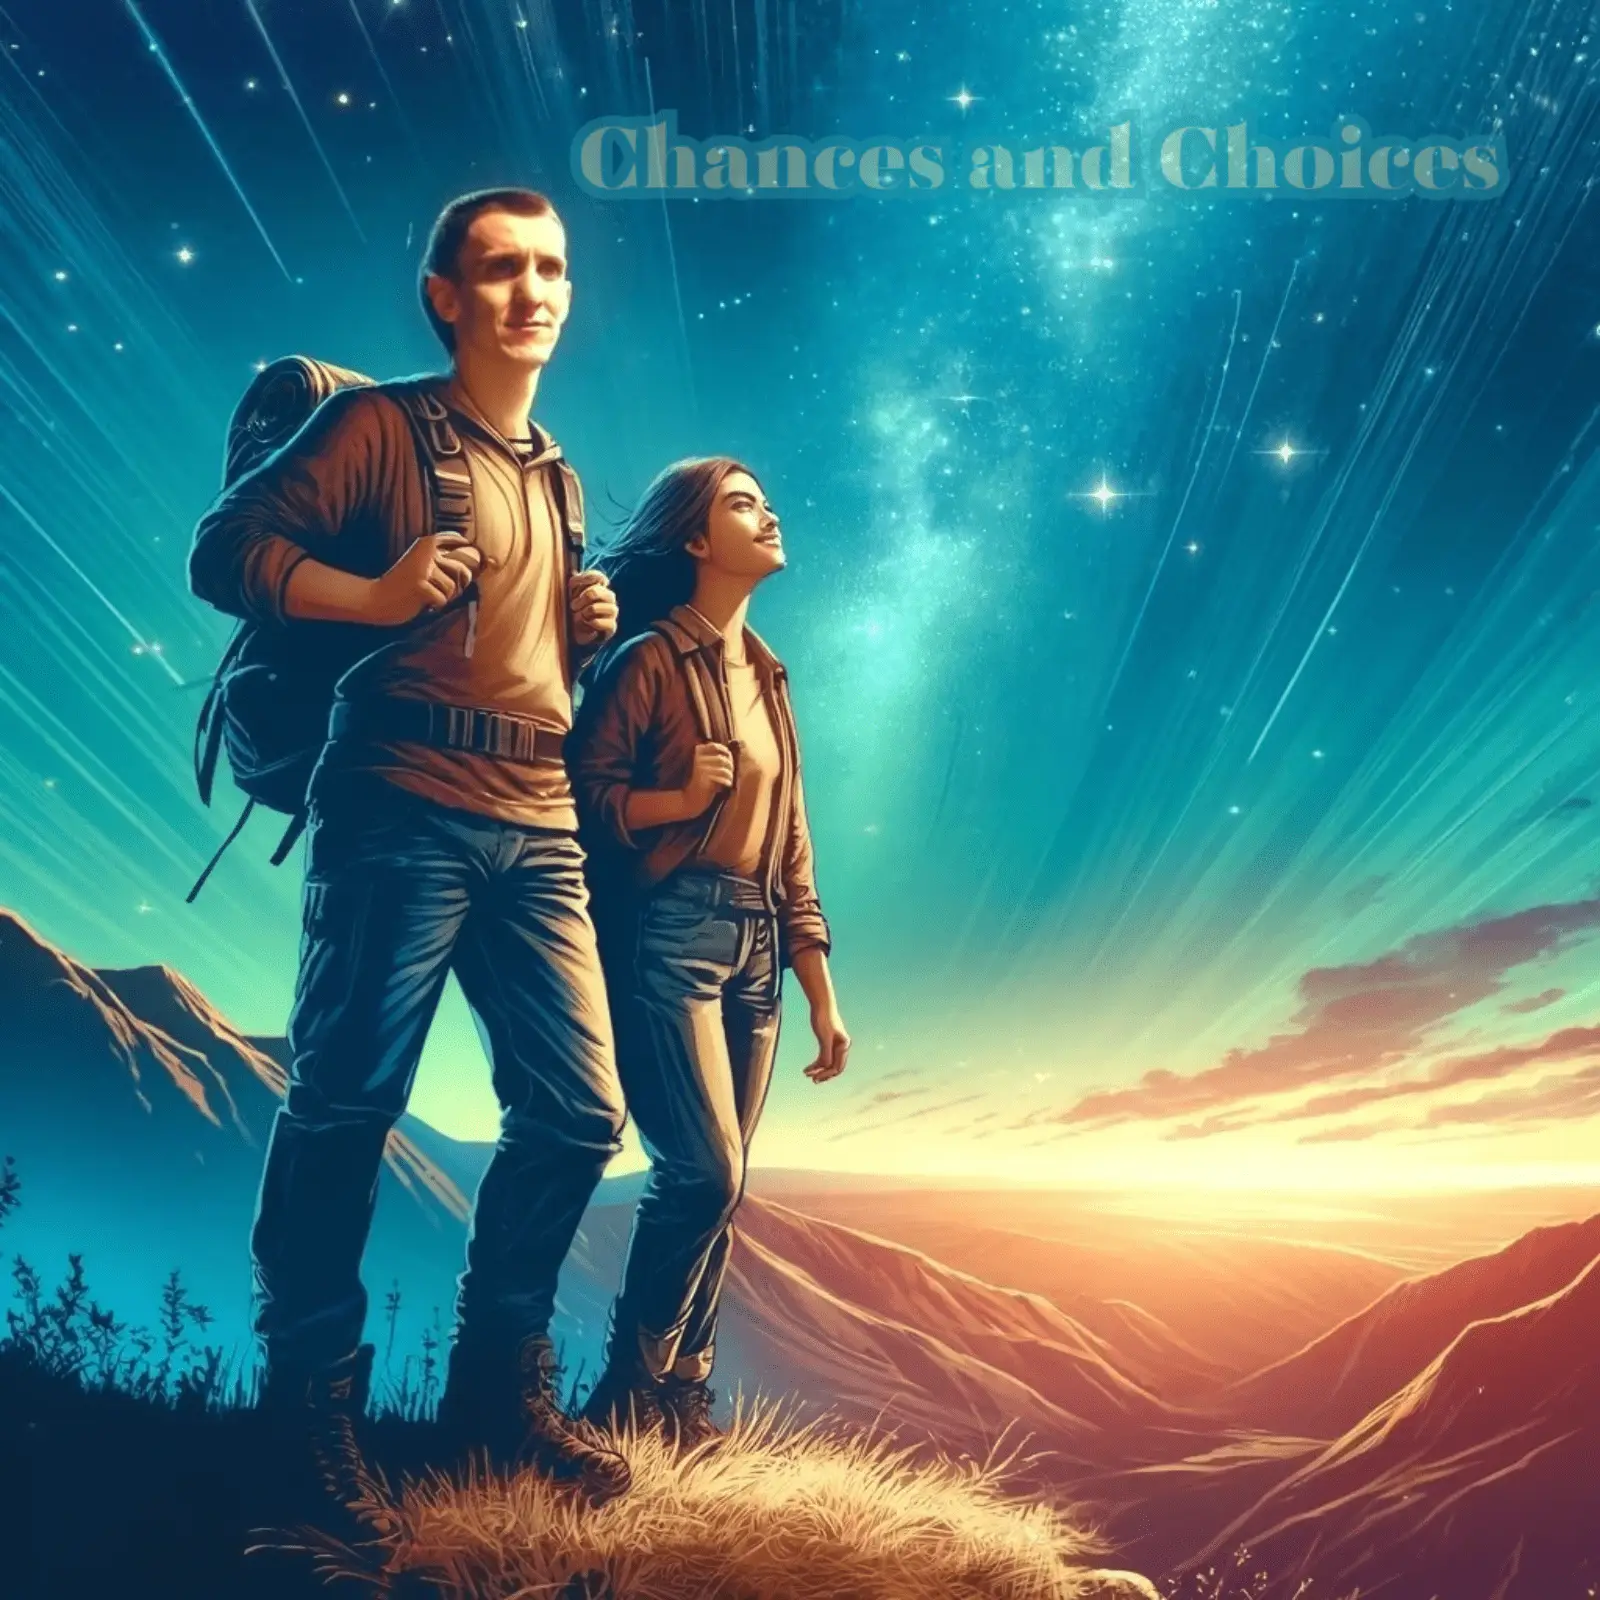 Chances and Choices 03 (1)